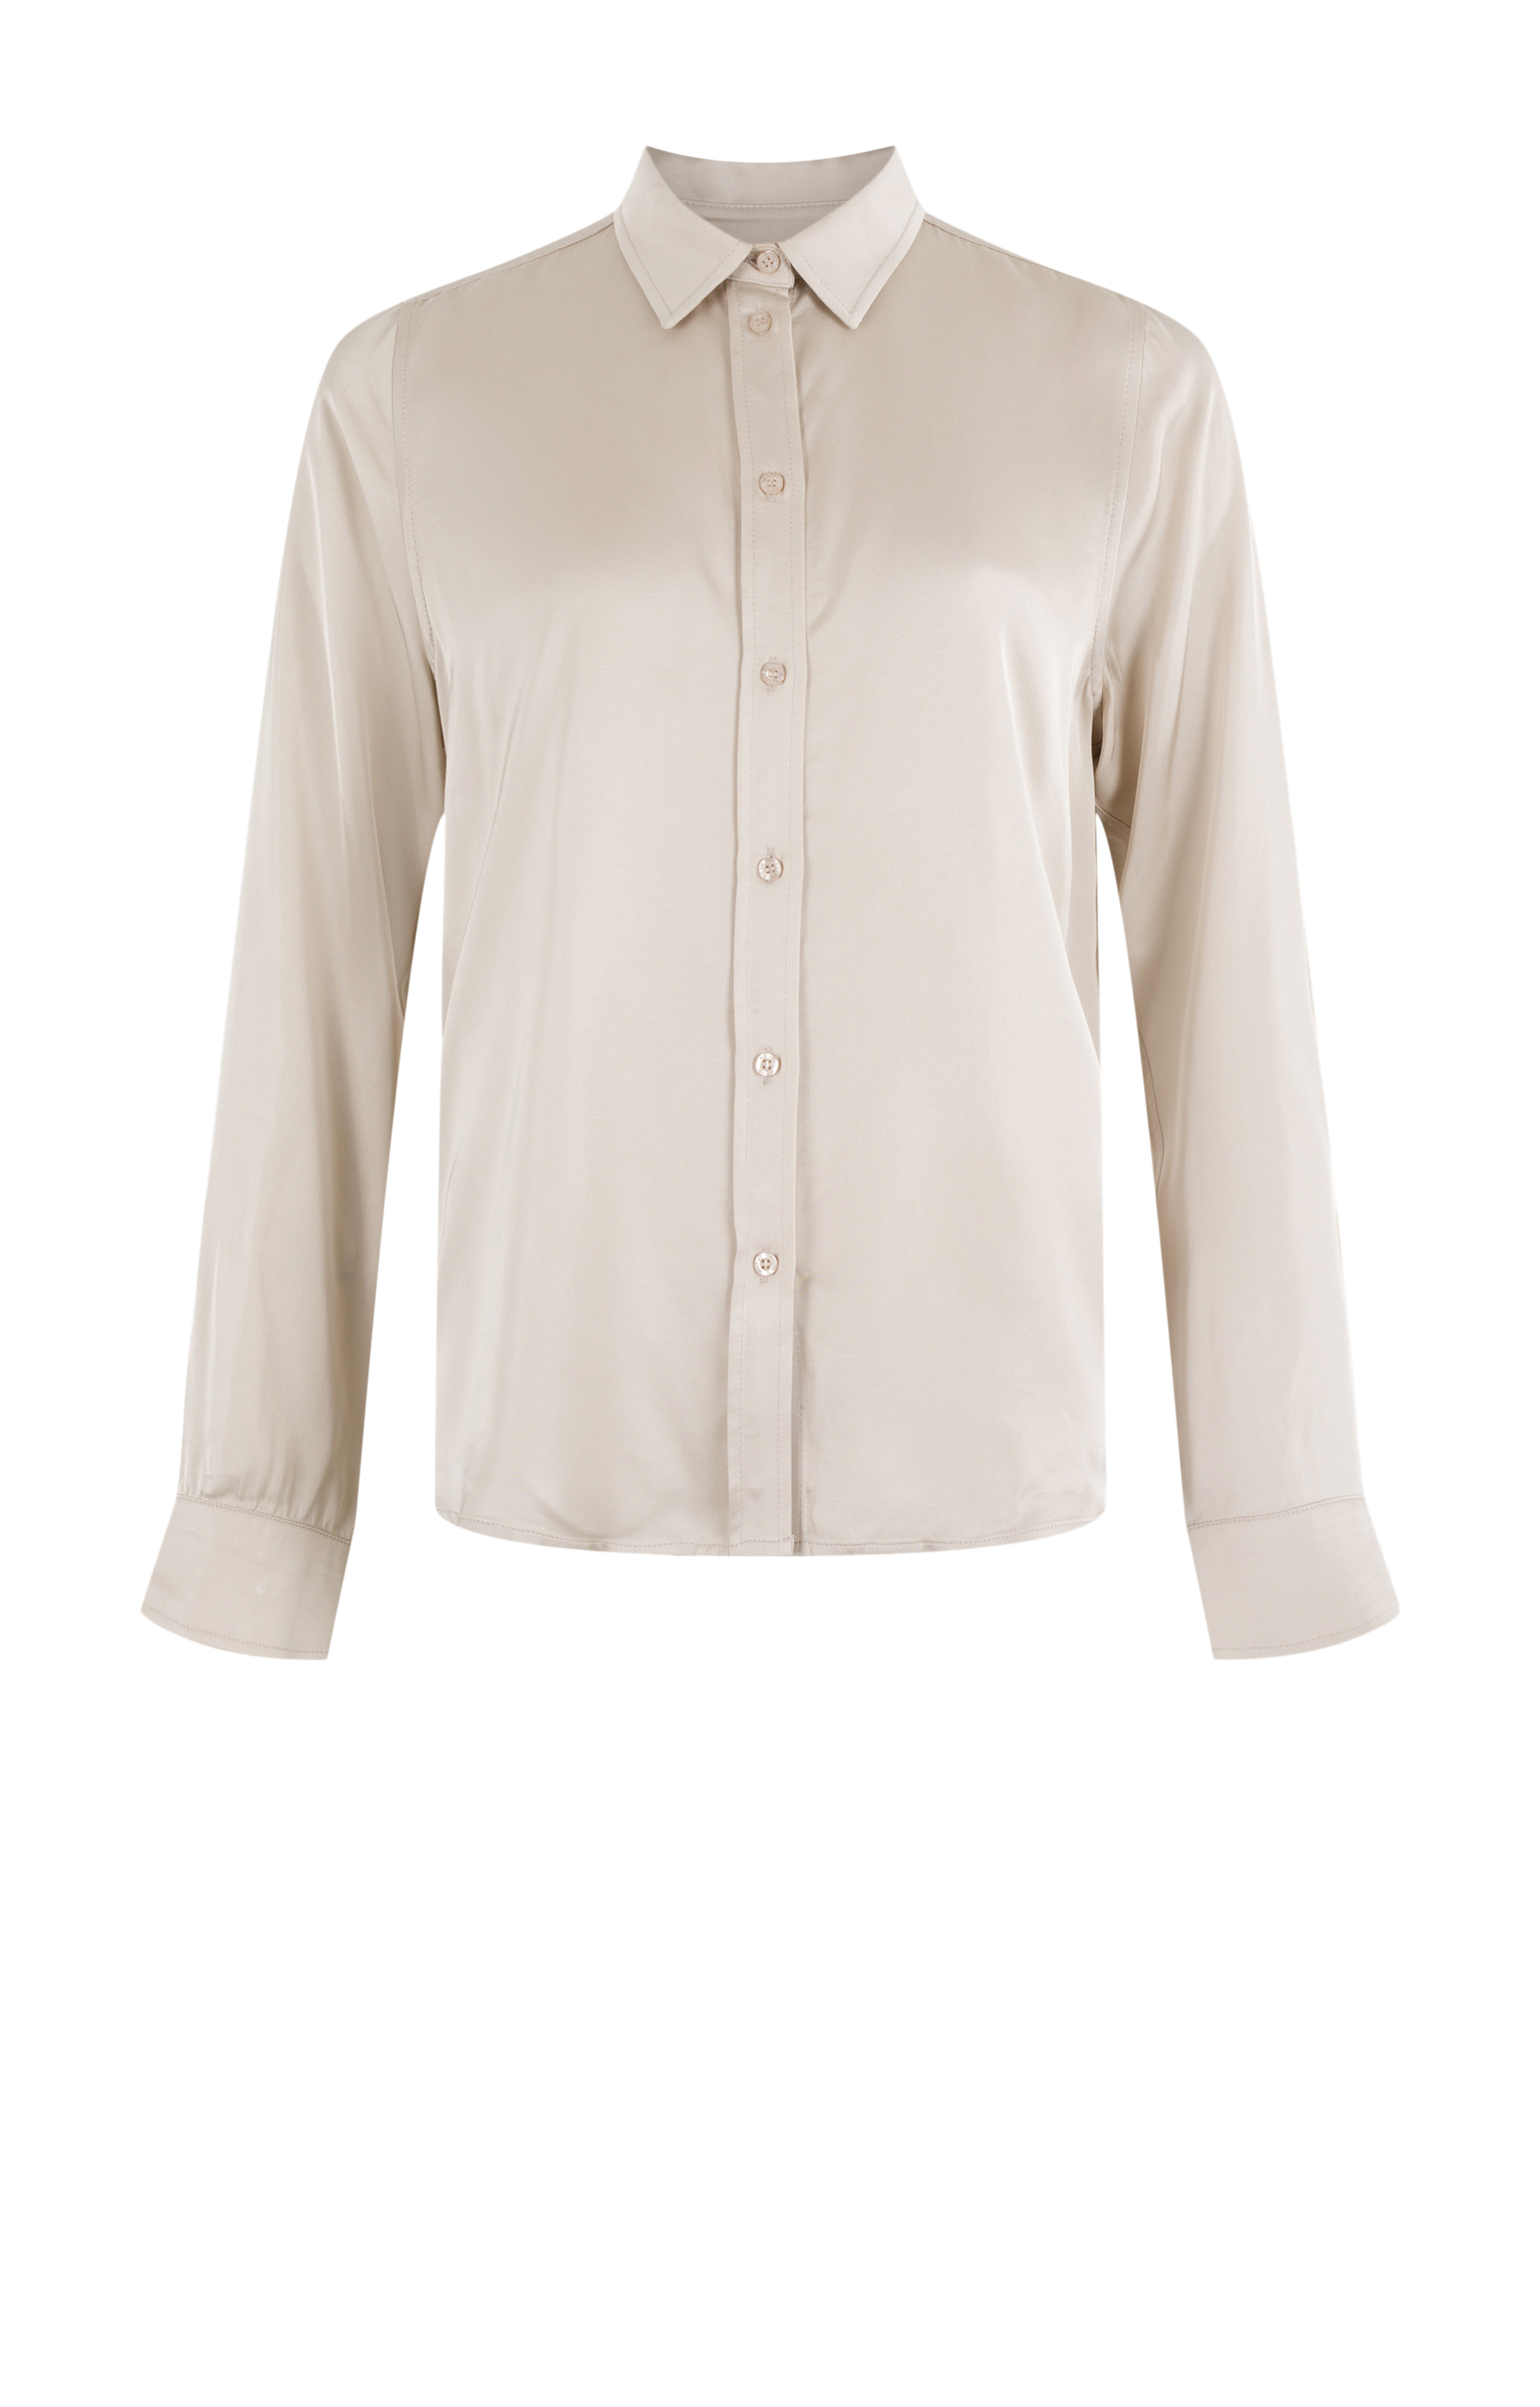 Moscow - LittleButtons Blouse Chalk Solid - S - Dames